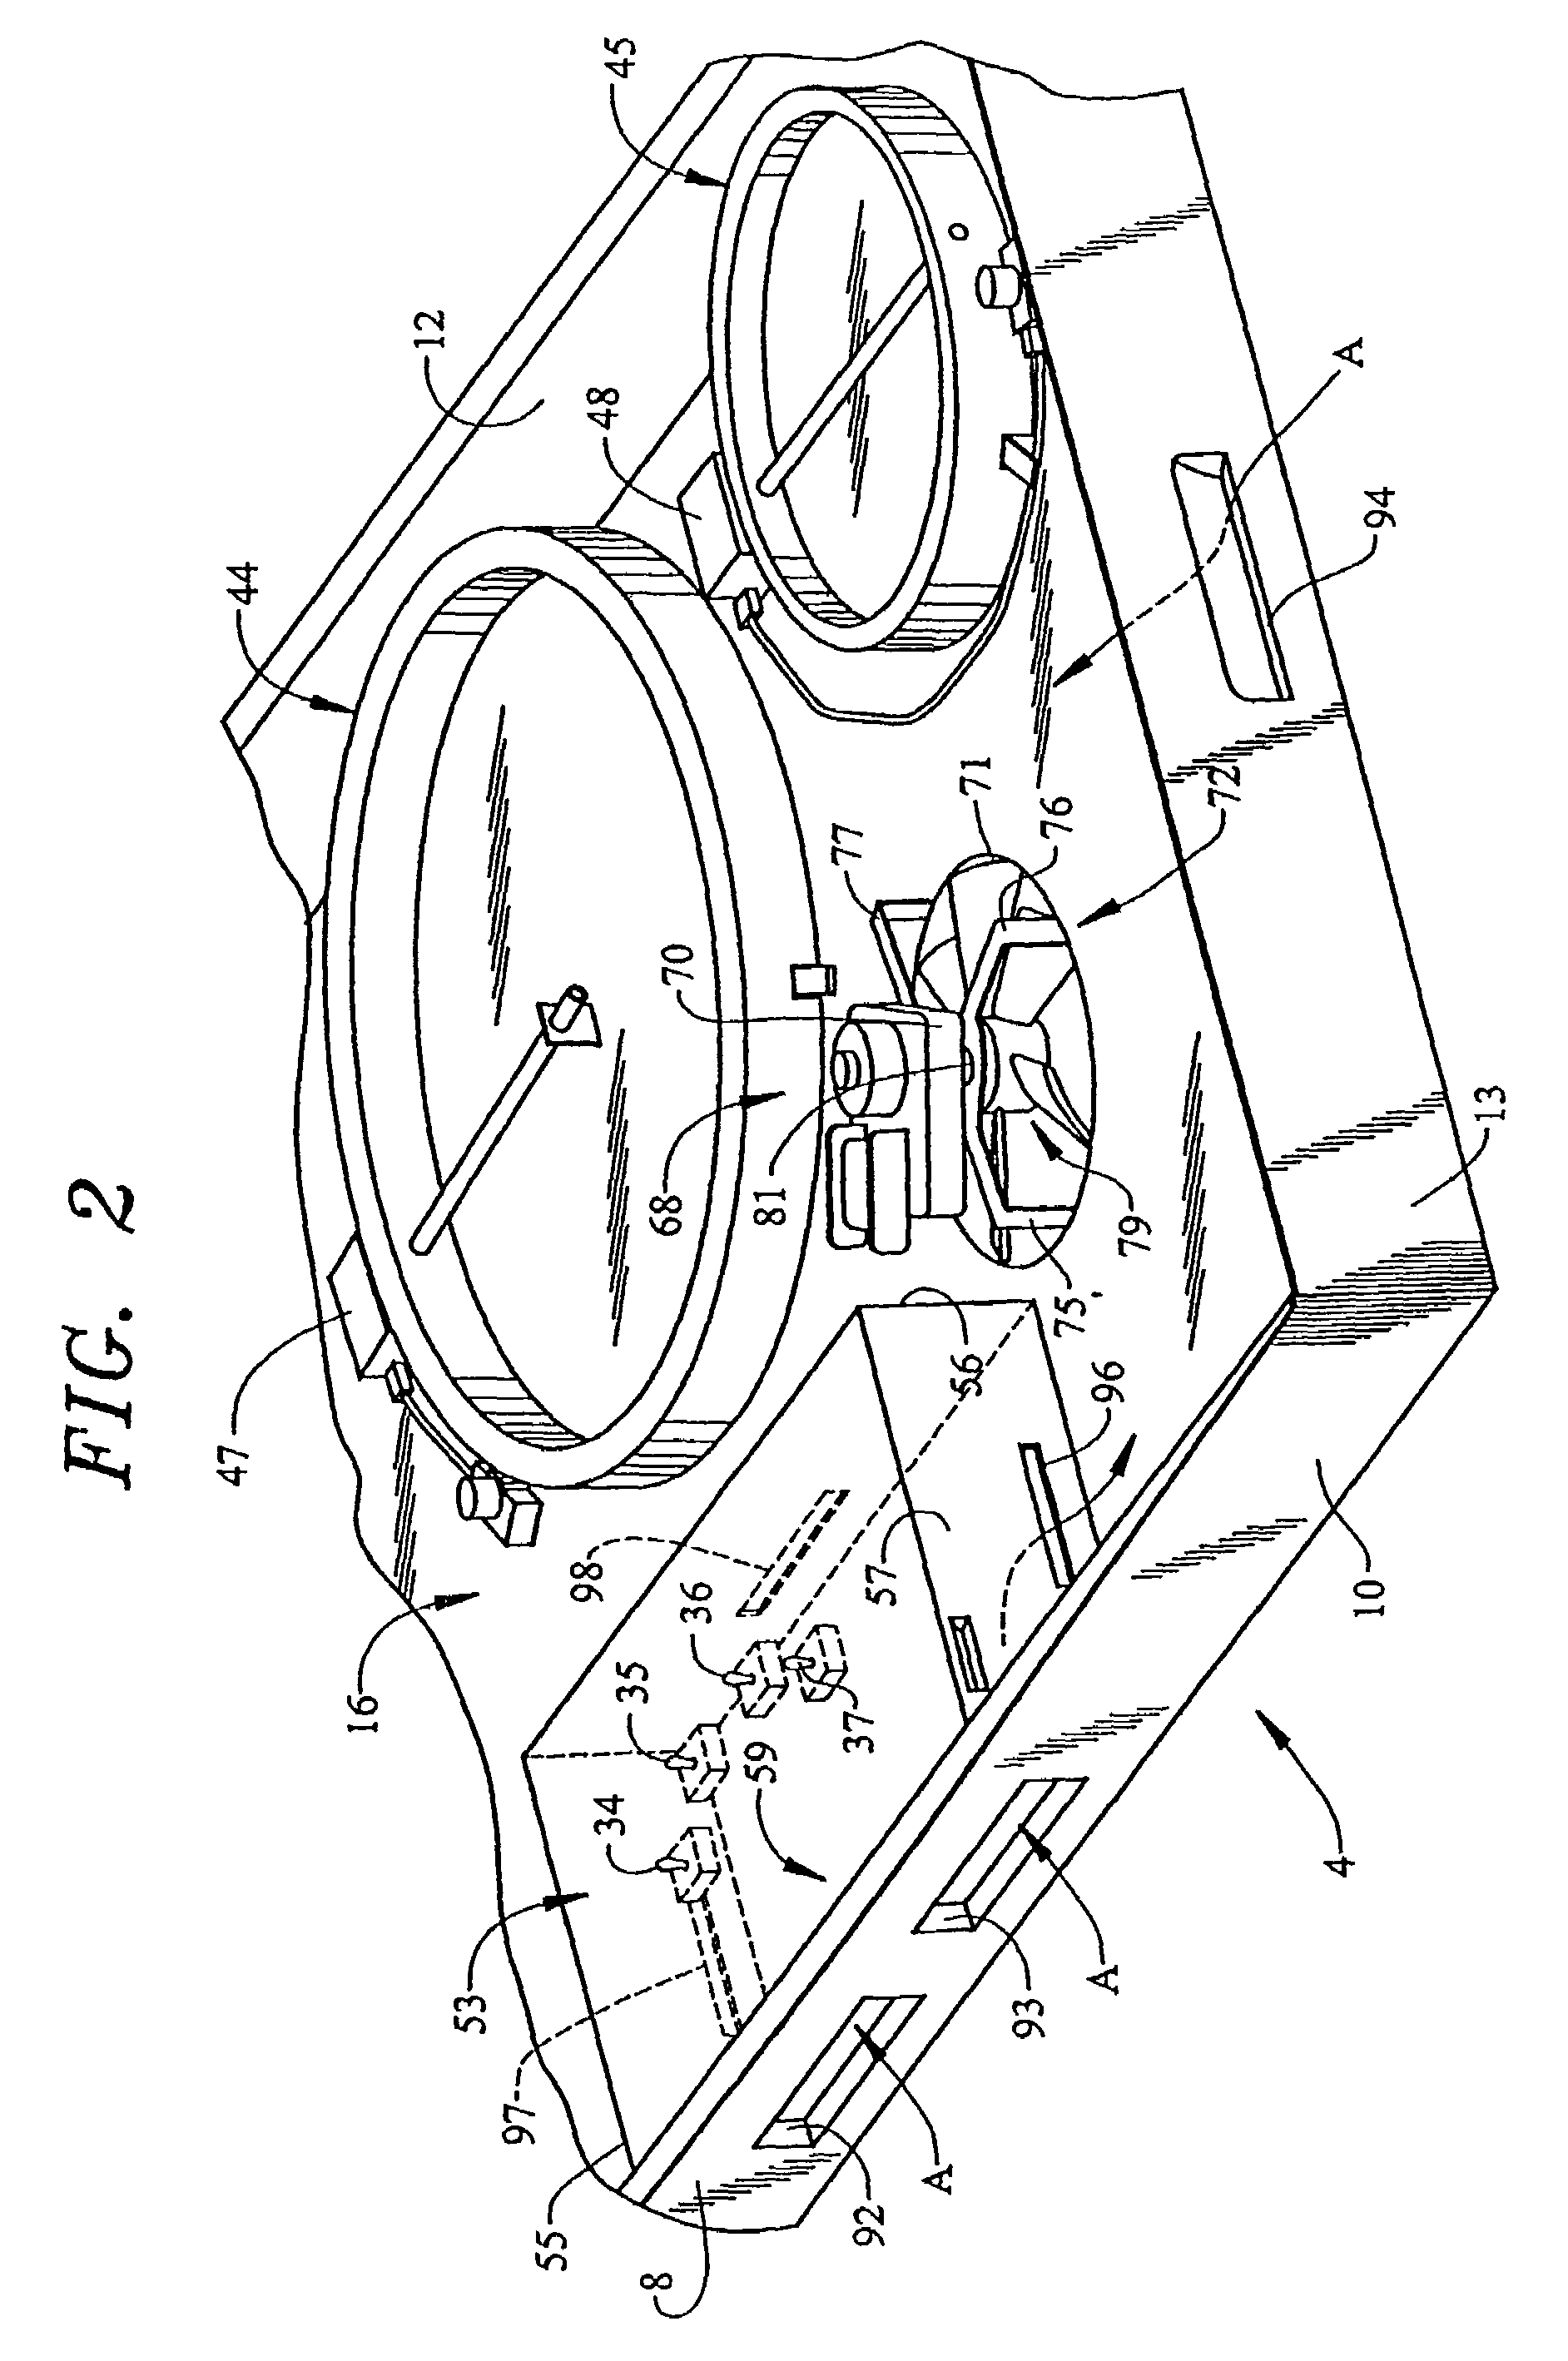 Ventilation system for a cooking appliance